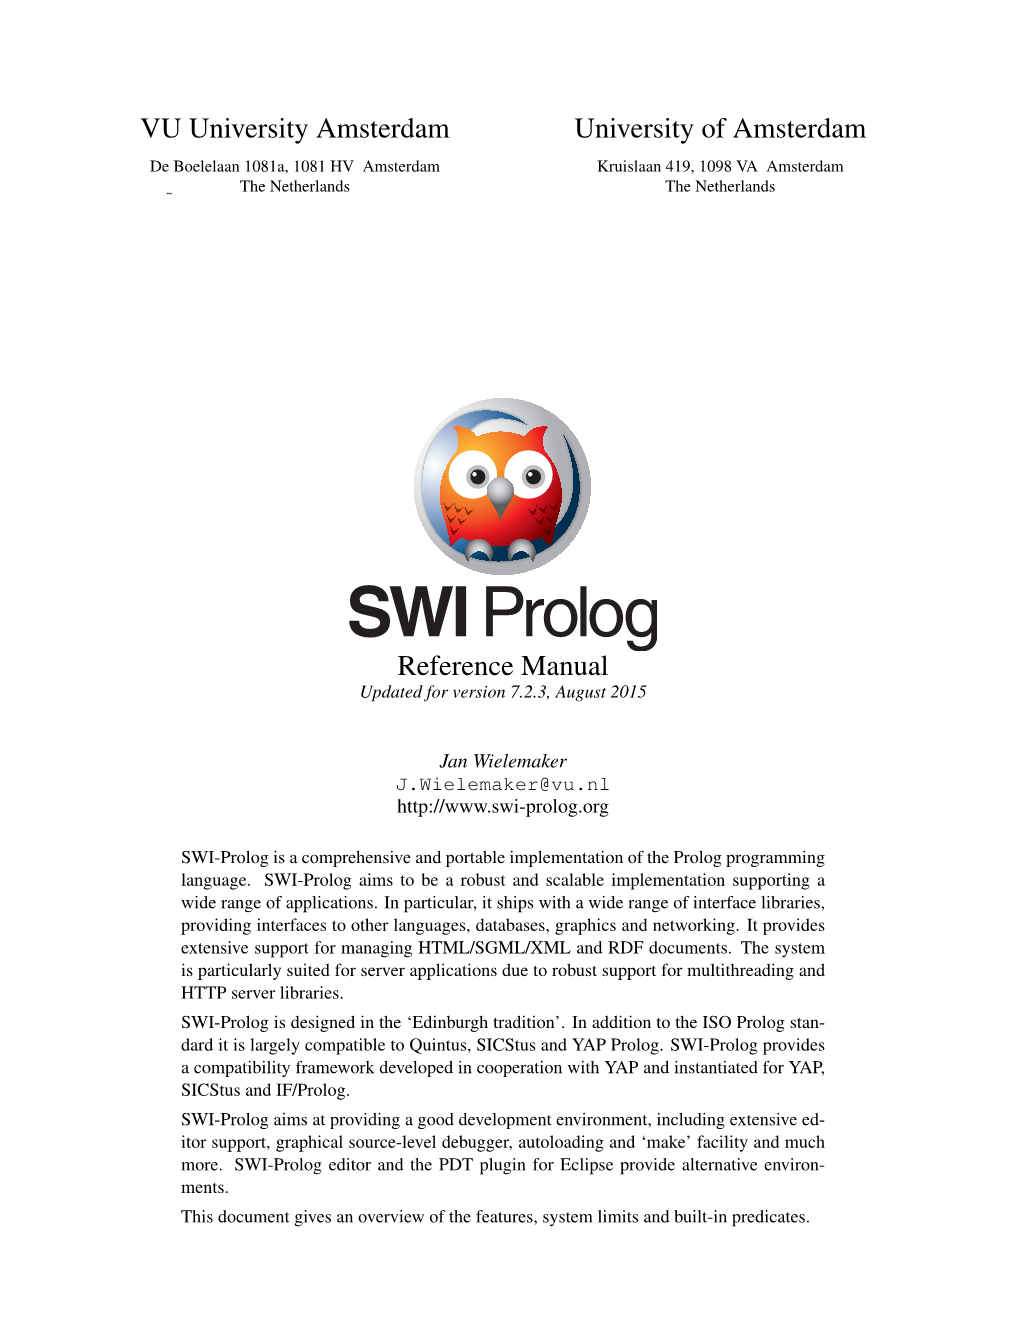 Local Copy of the SWI Prolog Manual, Version 7.2.3 (August 2015)